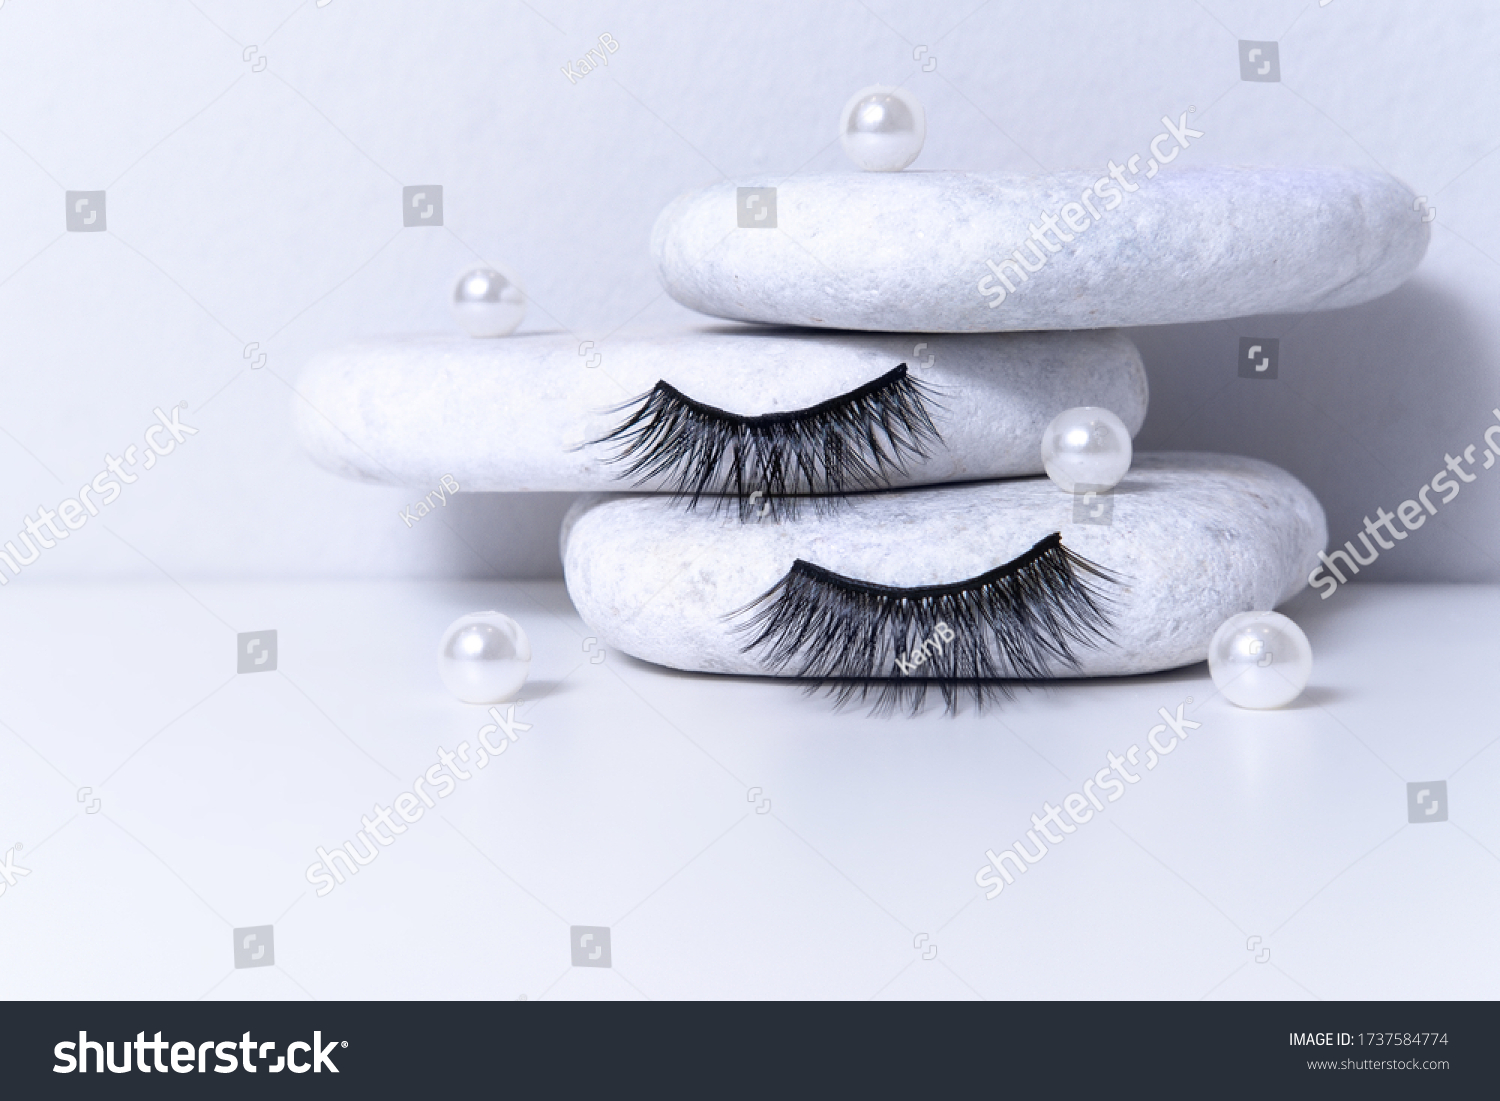 Magnetic fake artificial eyelashes and pearl on white stones. Home eyelash extension, cosmetology tool concept, beauty treatment, improving physical appearance #1737584774